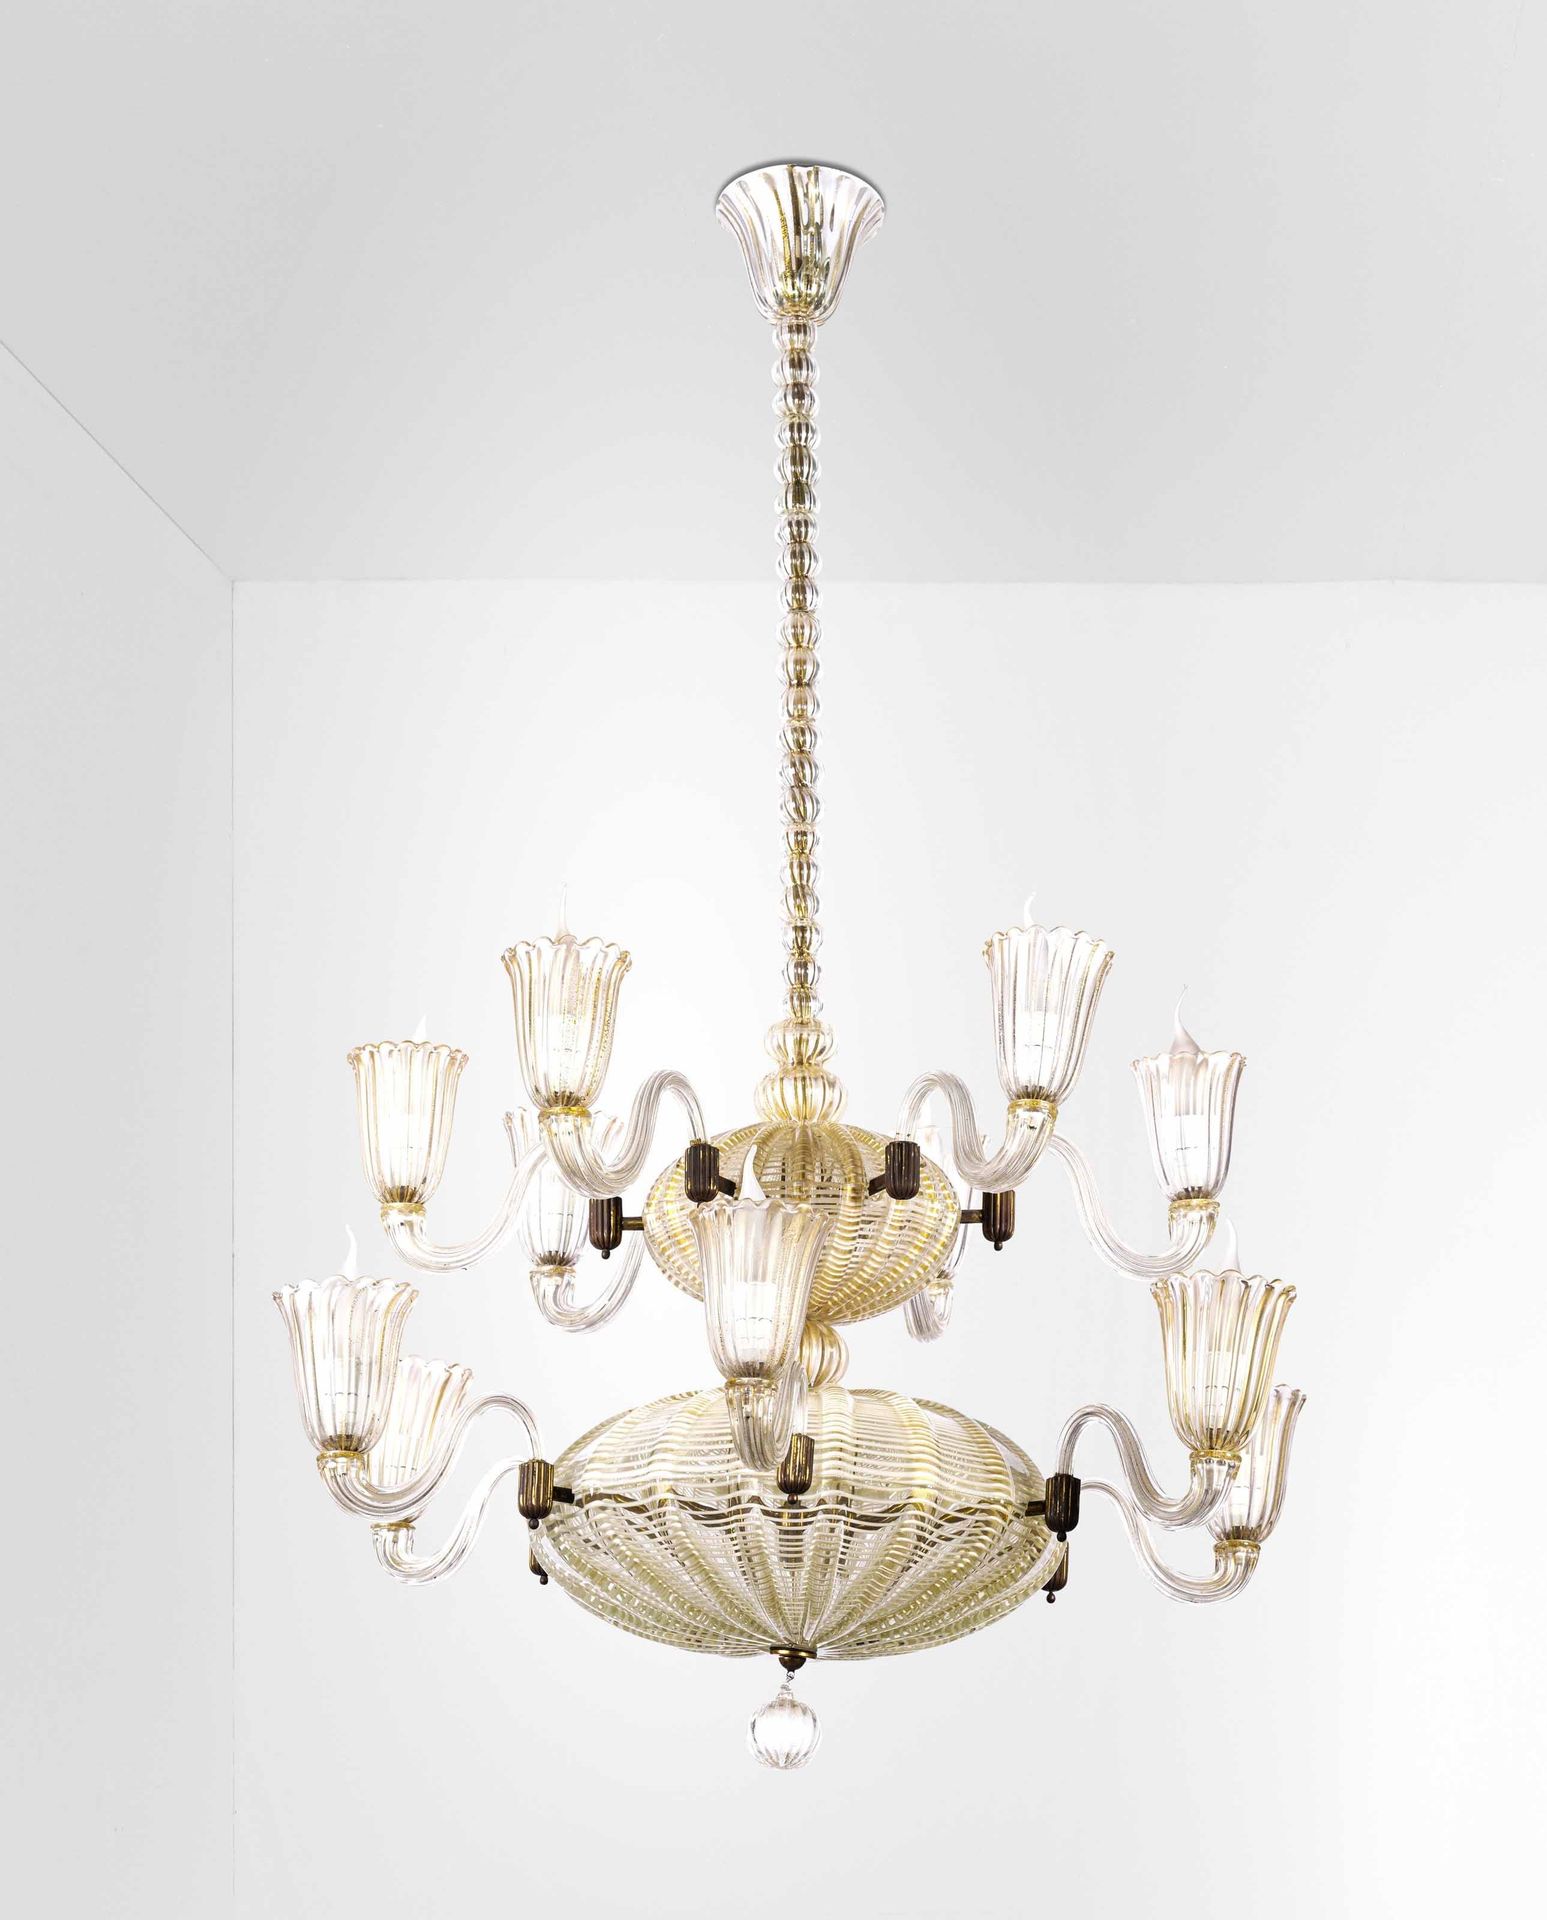 Barovier e Toso Suspension lamp with brass frame and Murano glass diffuser eleme&hellip;